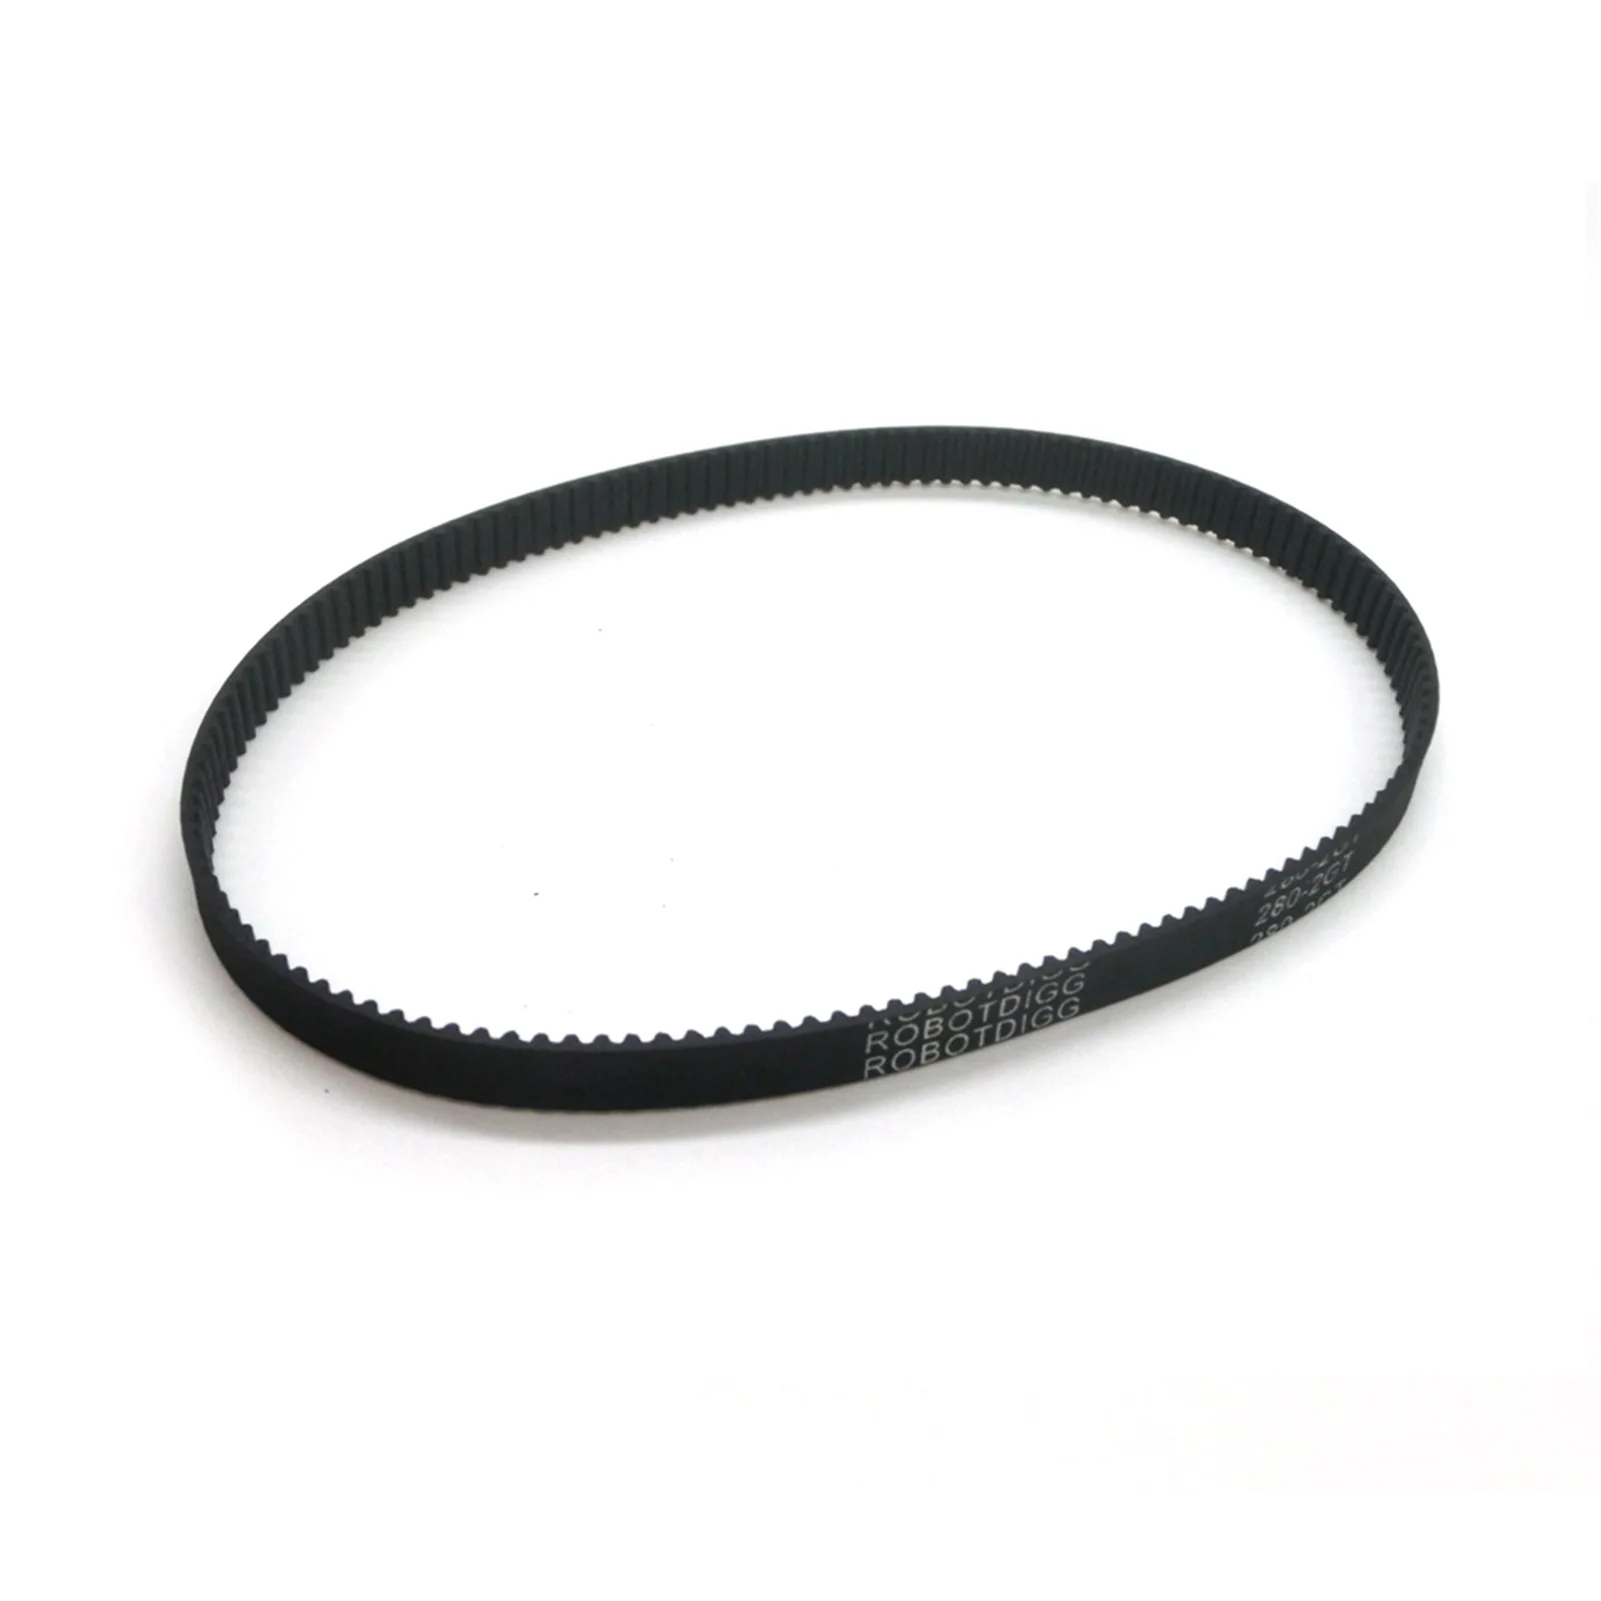 

GT2 Timing Belt 2GT Synchronous Belt Pulley Pitch, Length GT2-140/150/154/158/160/172/180/188/190/192/194mm, Width 6mm